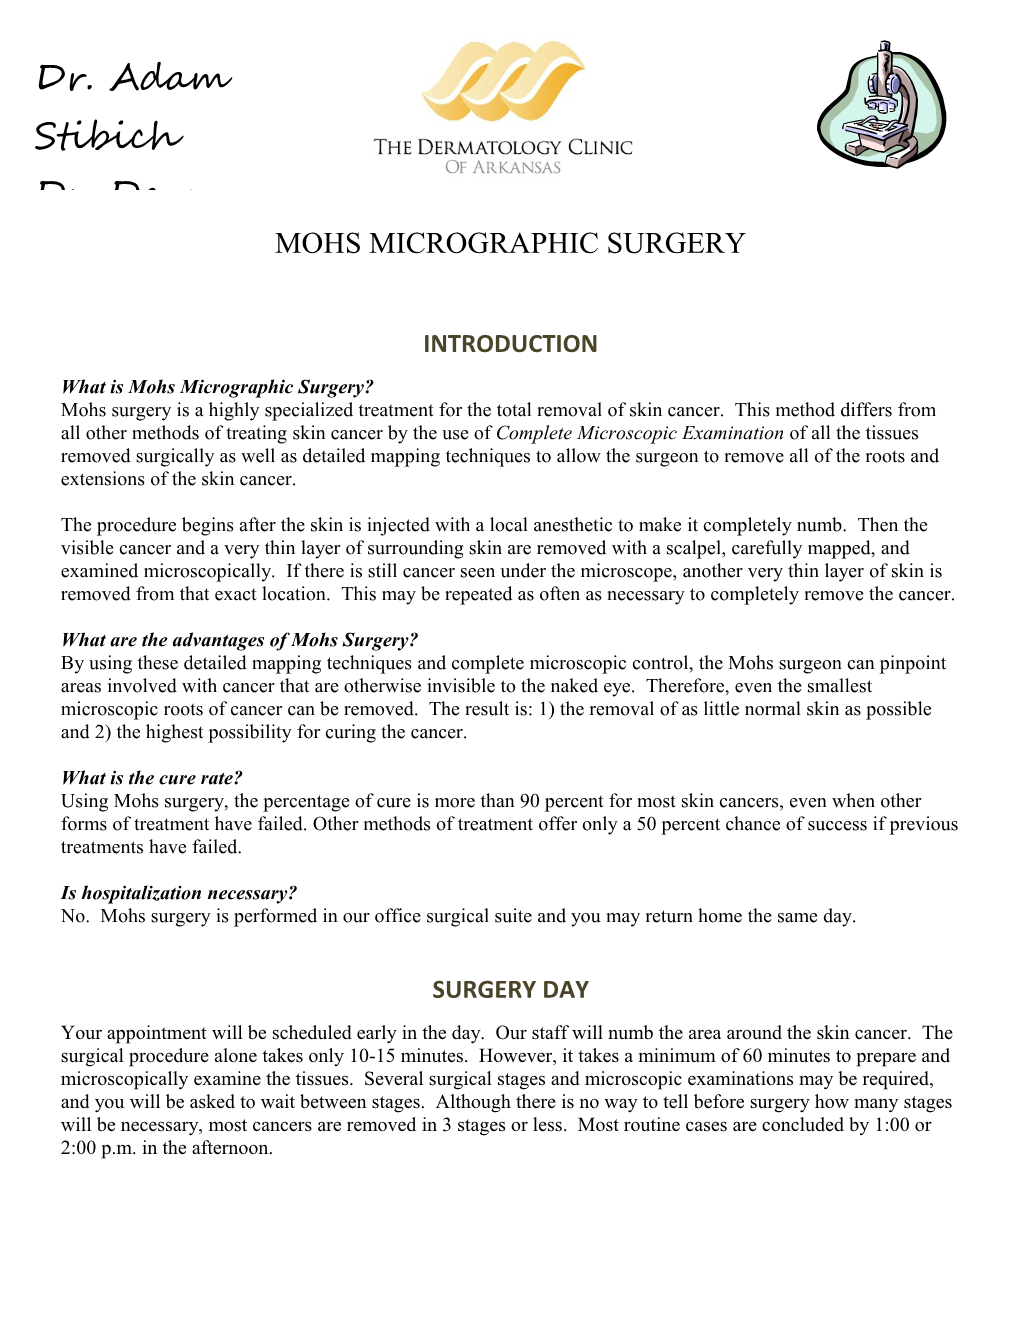 What Is Mohs Micrographic Surgery?